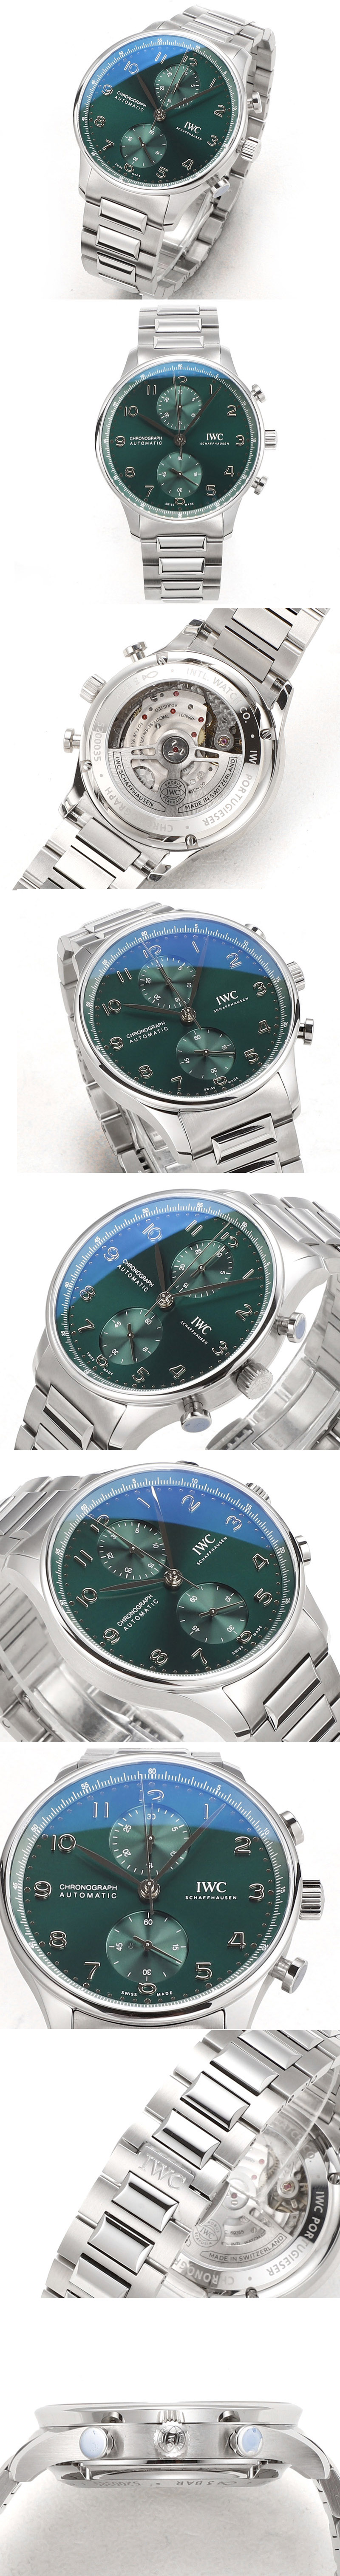 Replica IWC Portuguese Chrono IW3716 RSF 1:1 Best Edition Green Dial on SS Bracelet A7750